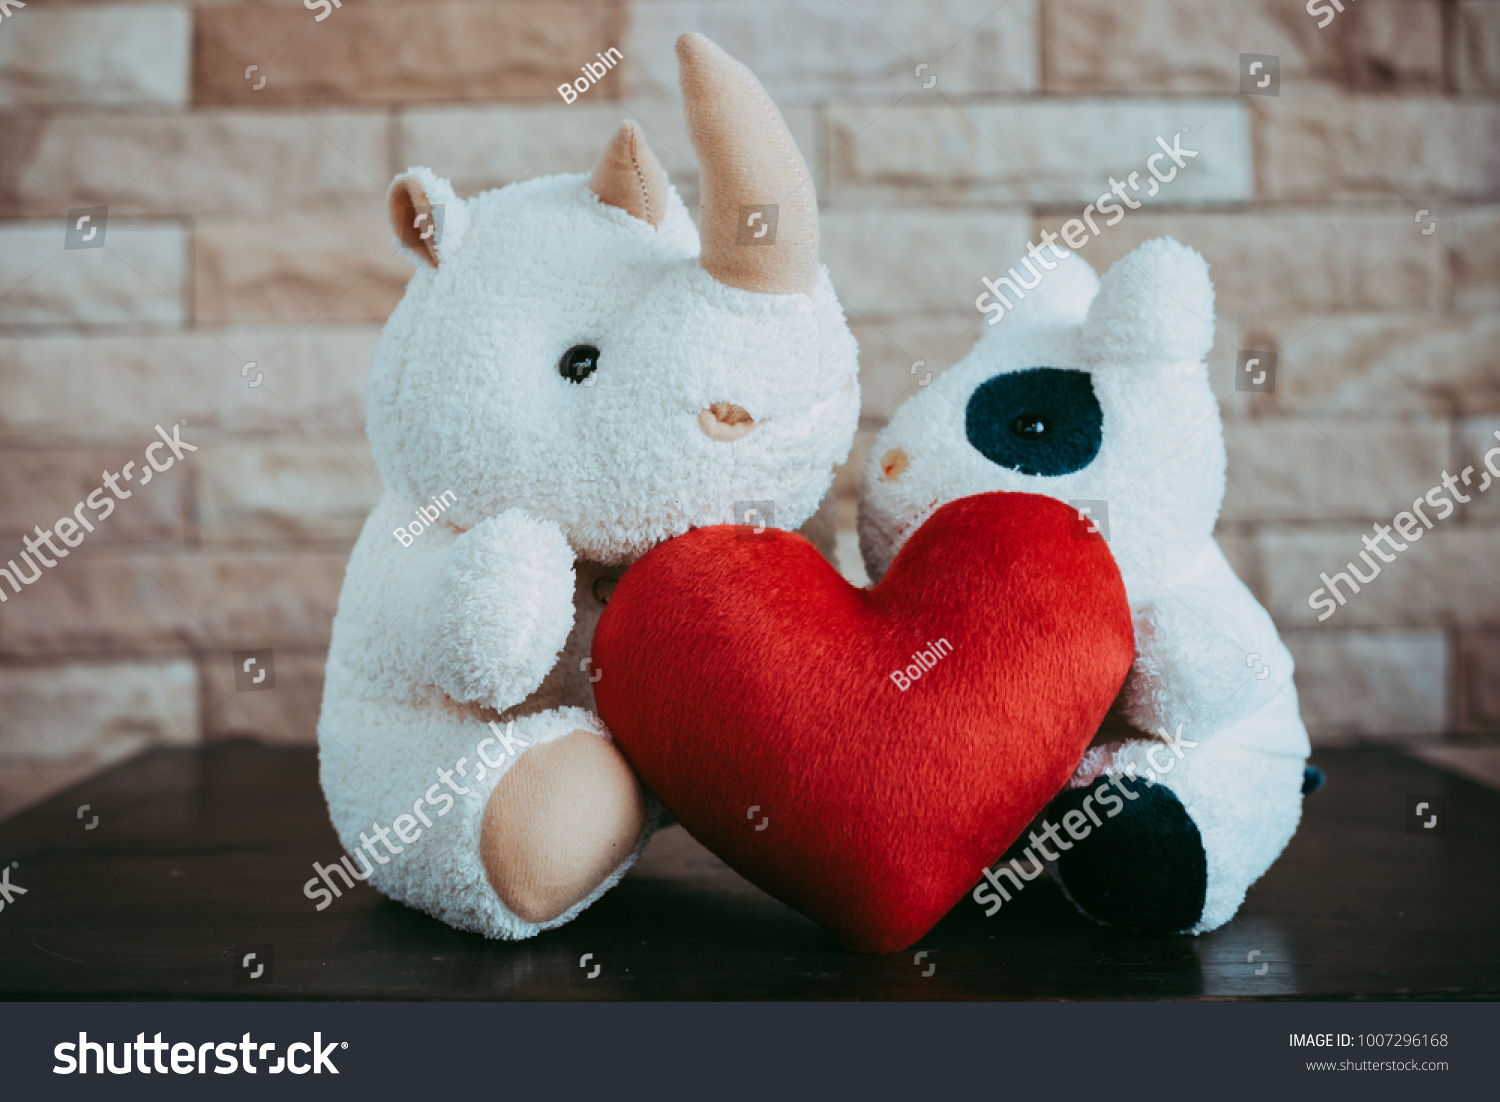 Rhinoceros doll and cow doll  with red heart shape,Valentine's Day concept. #1007296168